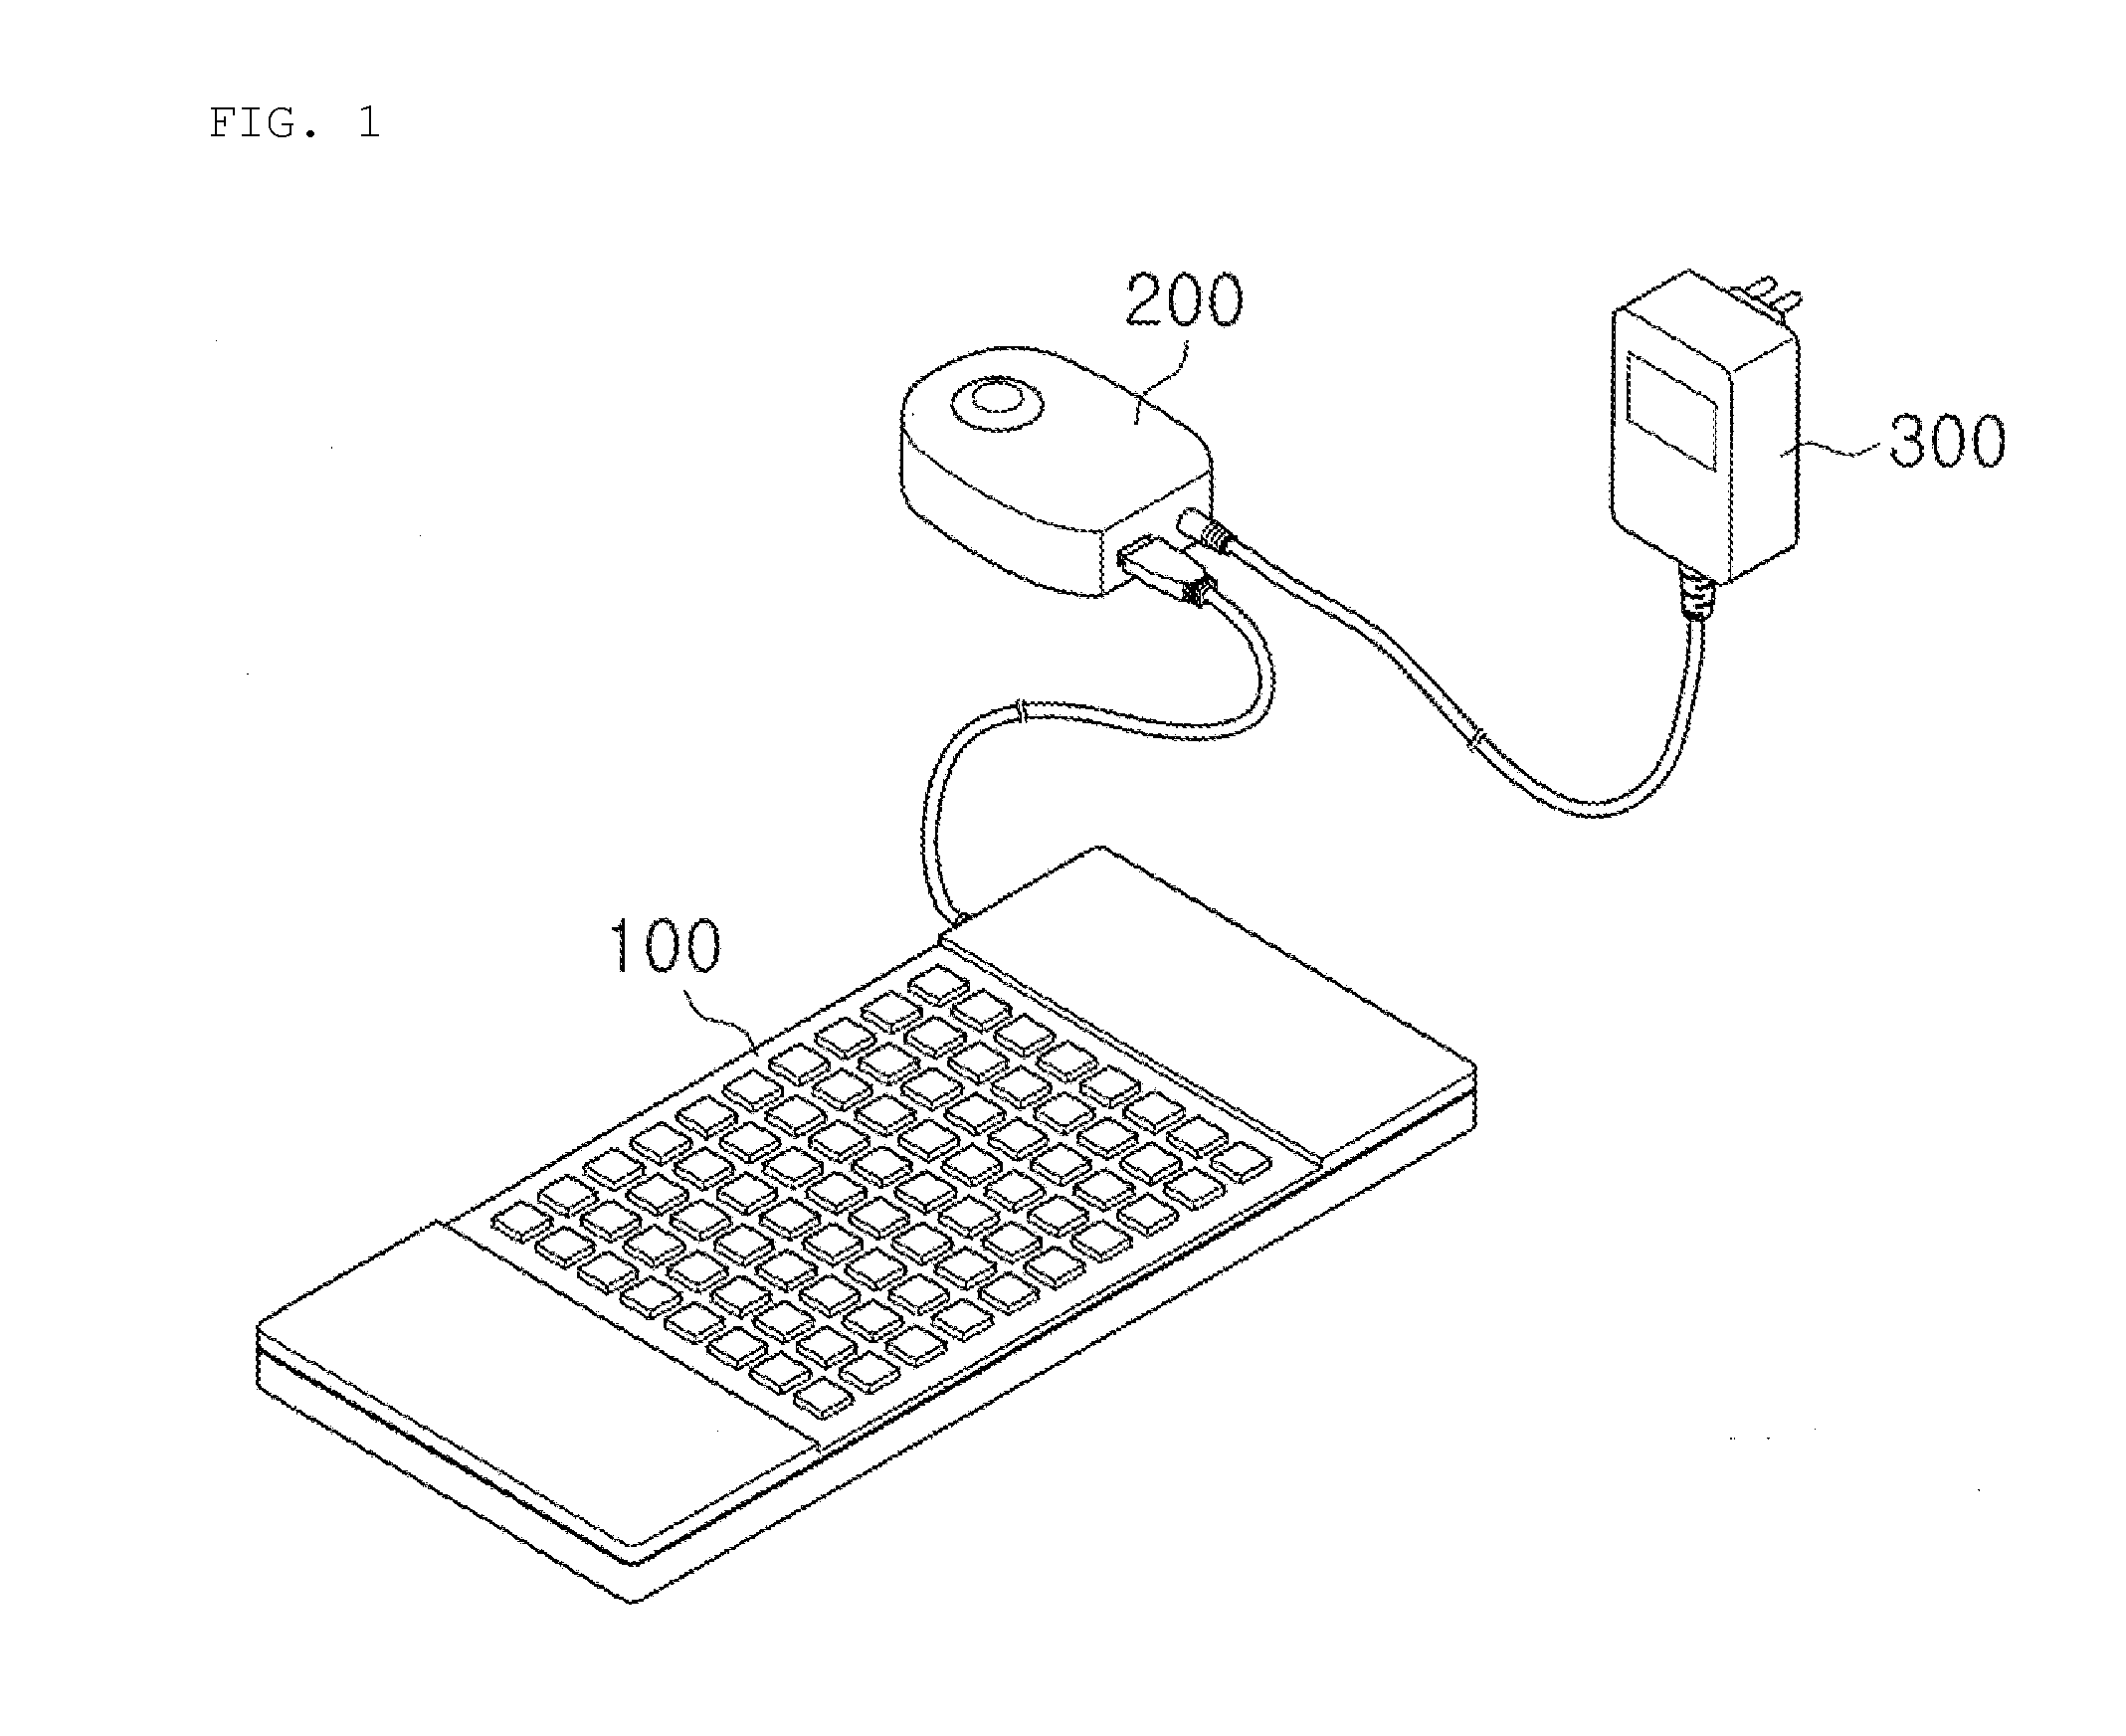 LED pad, method for manufacturing the same and personal treatment apparatus comprising the same